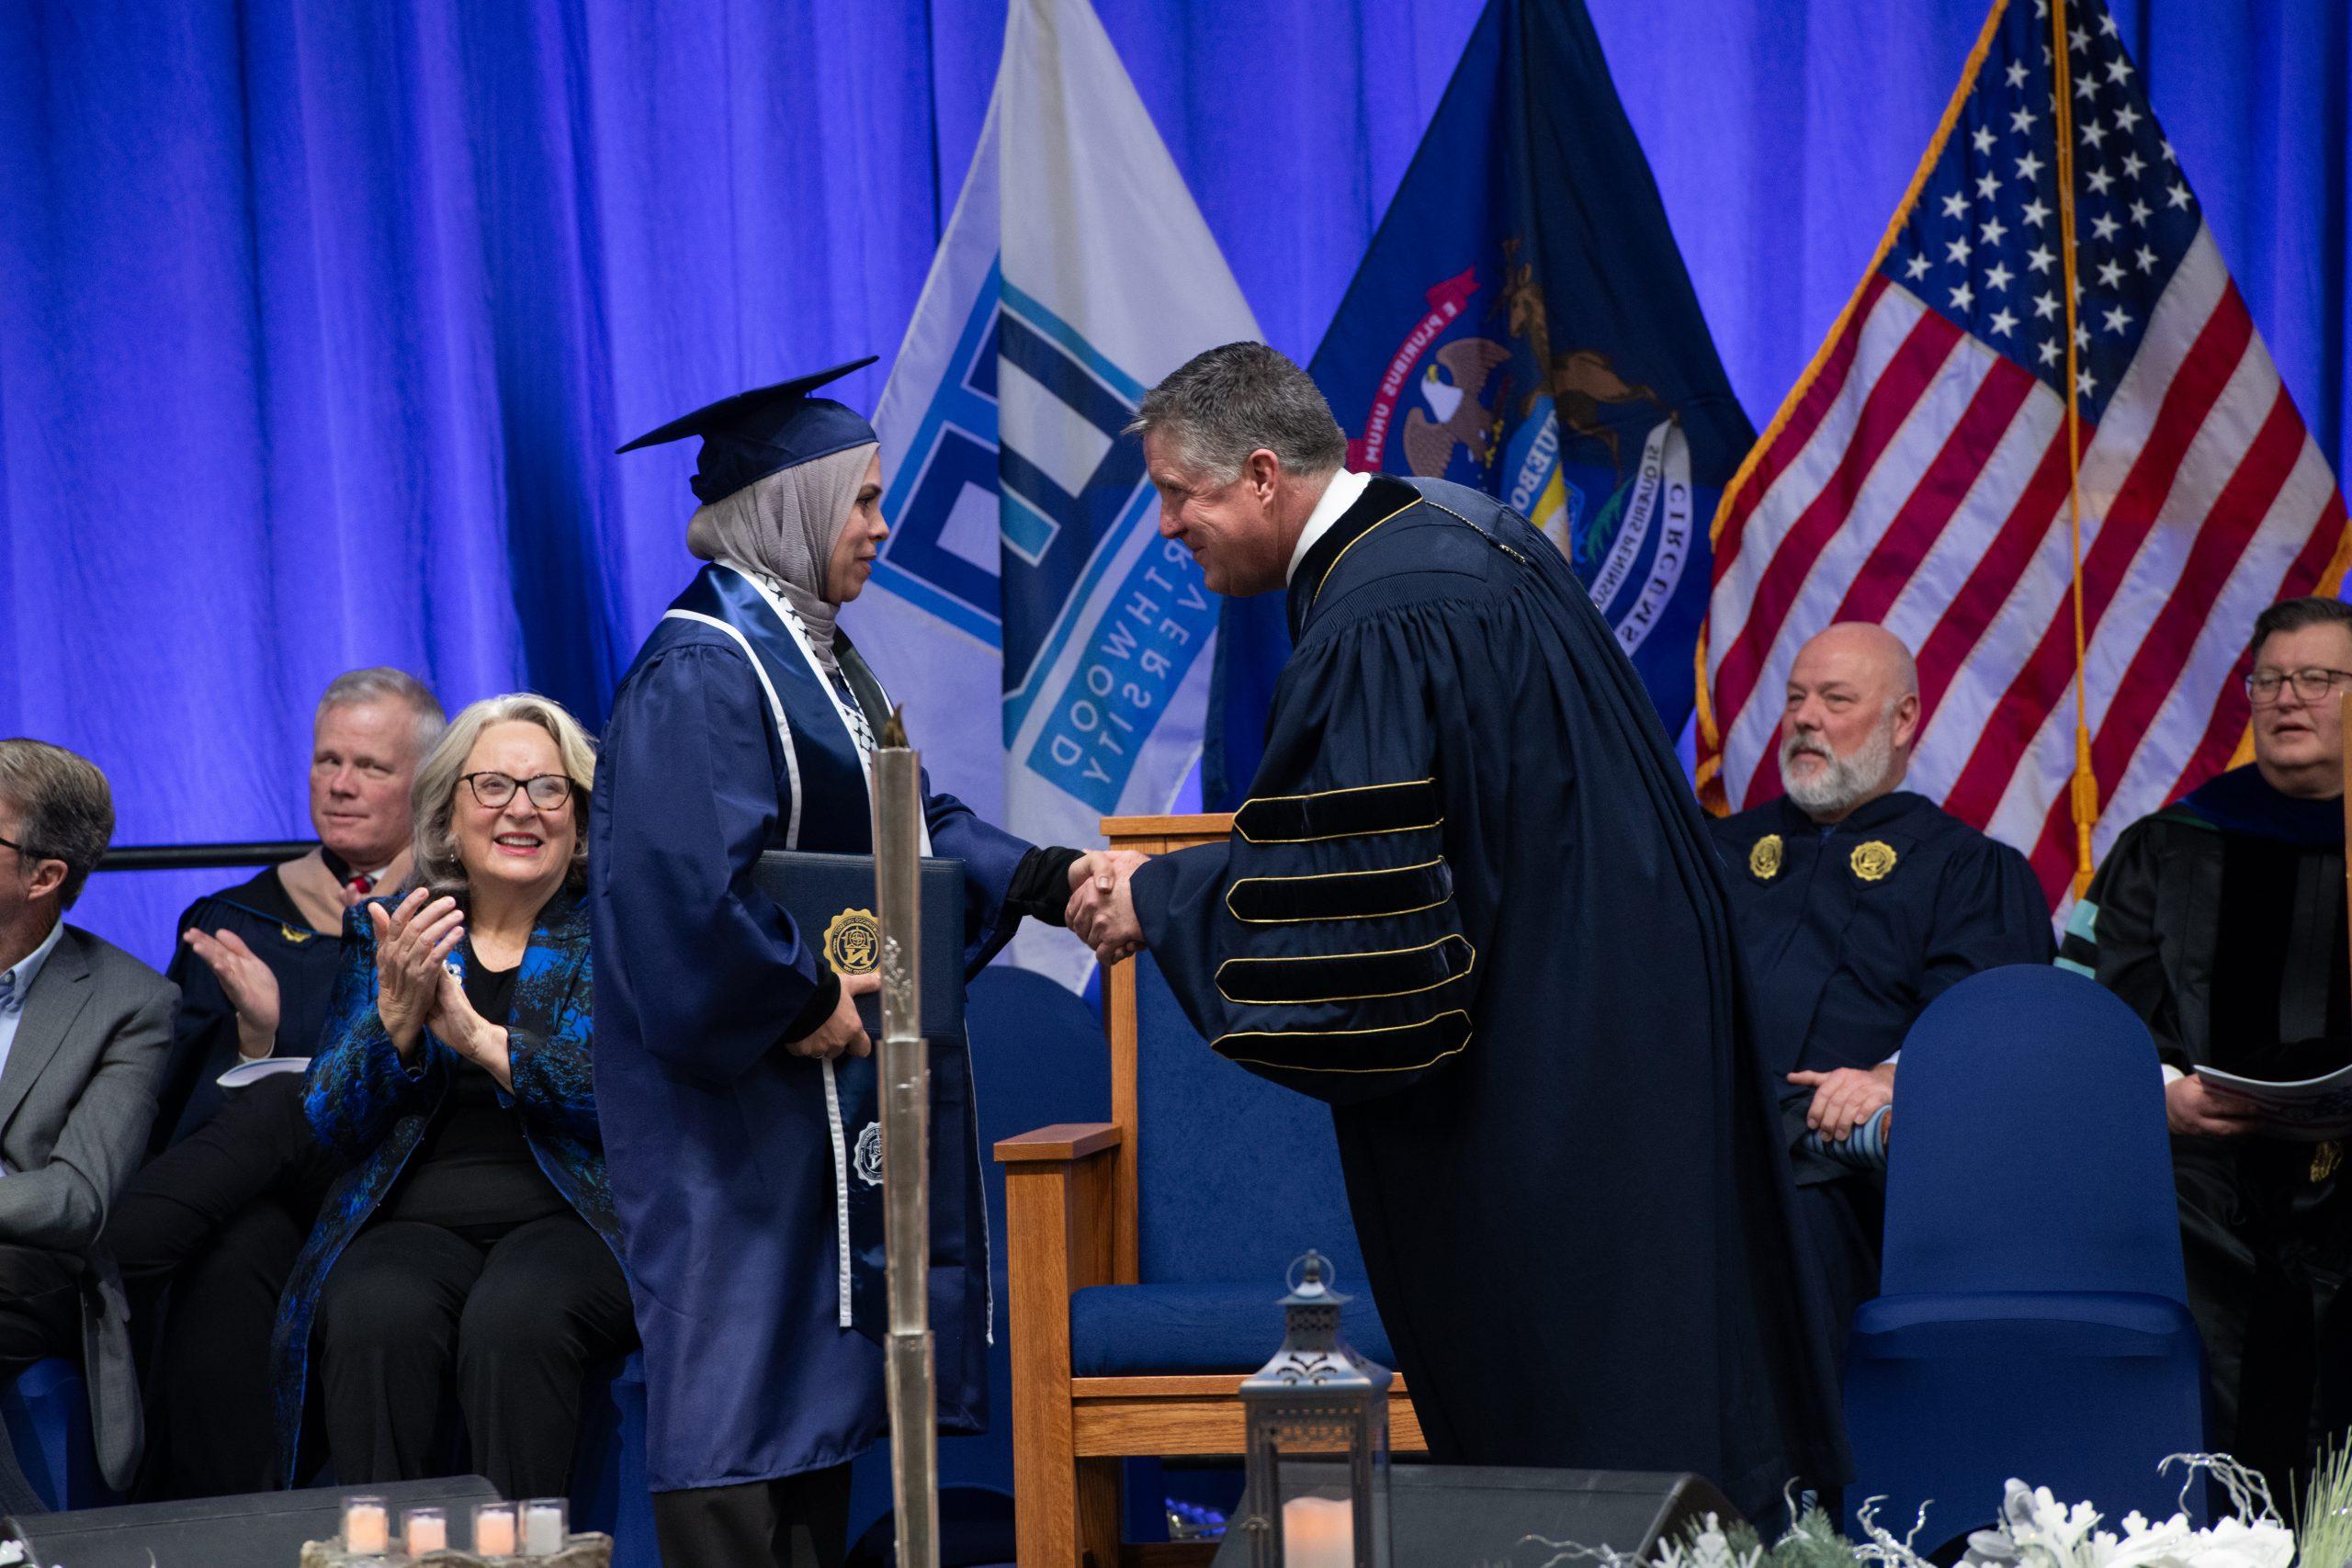 Northwood graduate on stage shaking hands with the President after accepting diploma